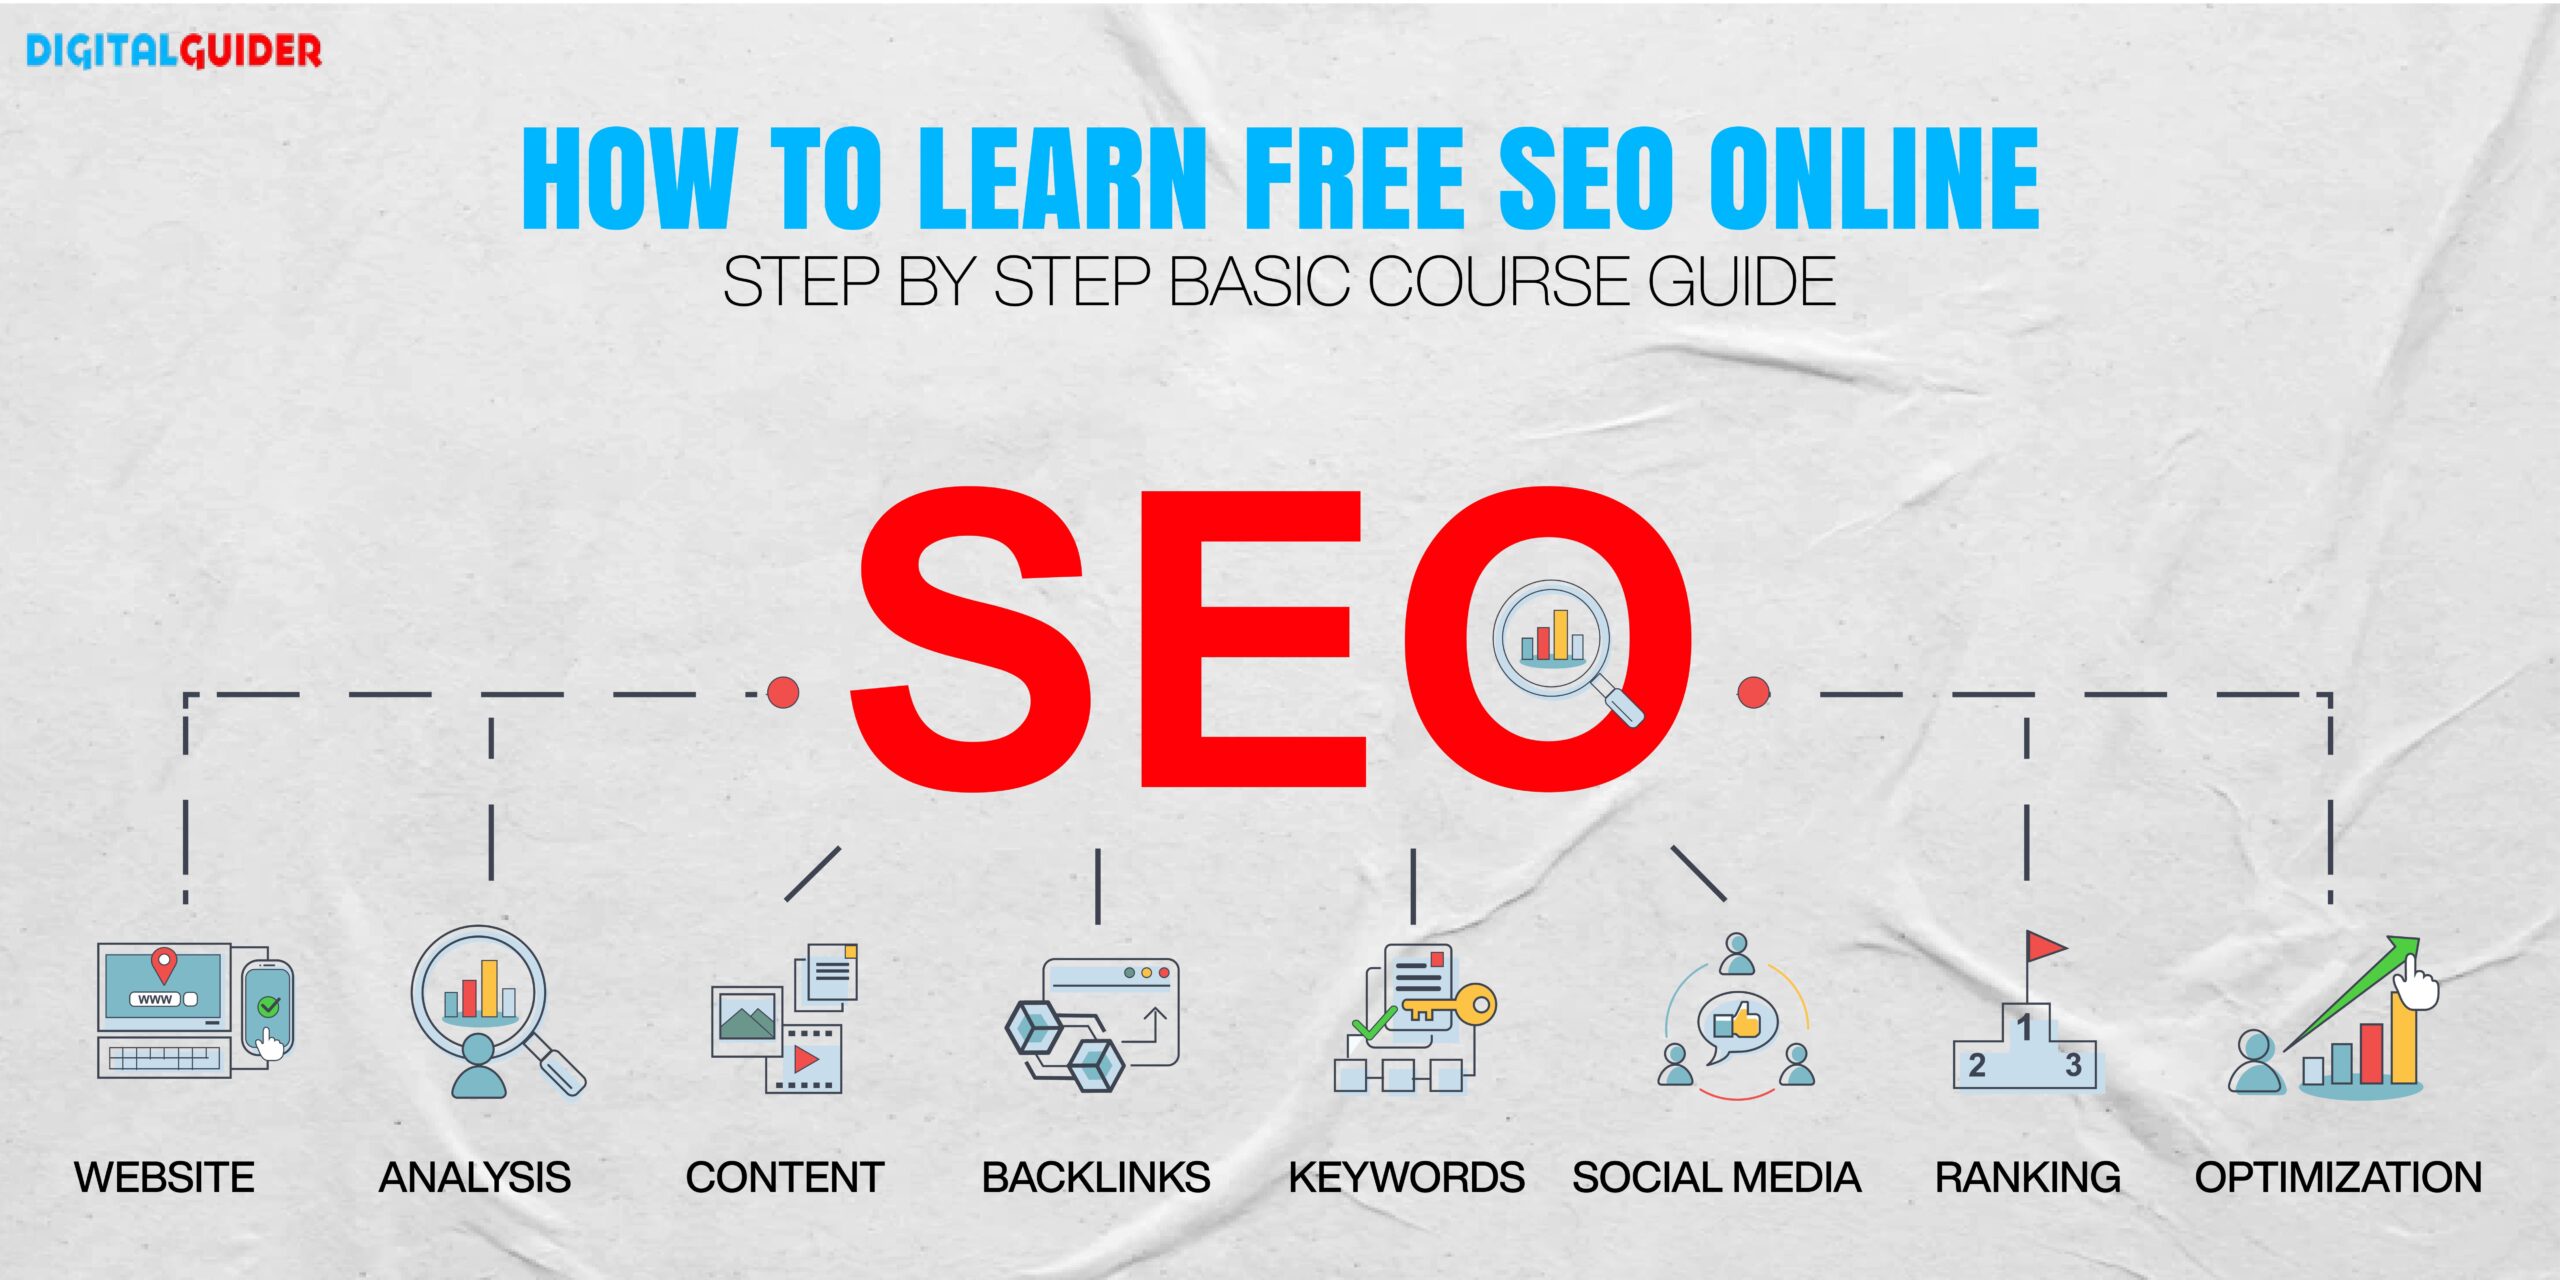 How To Learn Free SEO Online